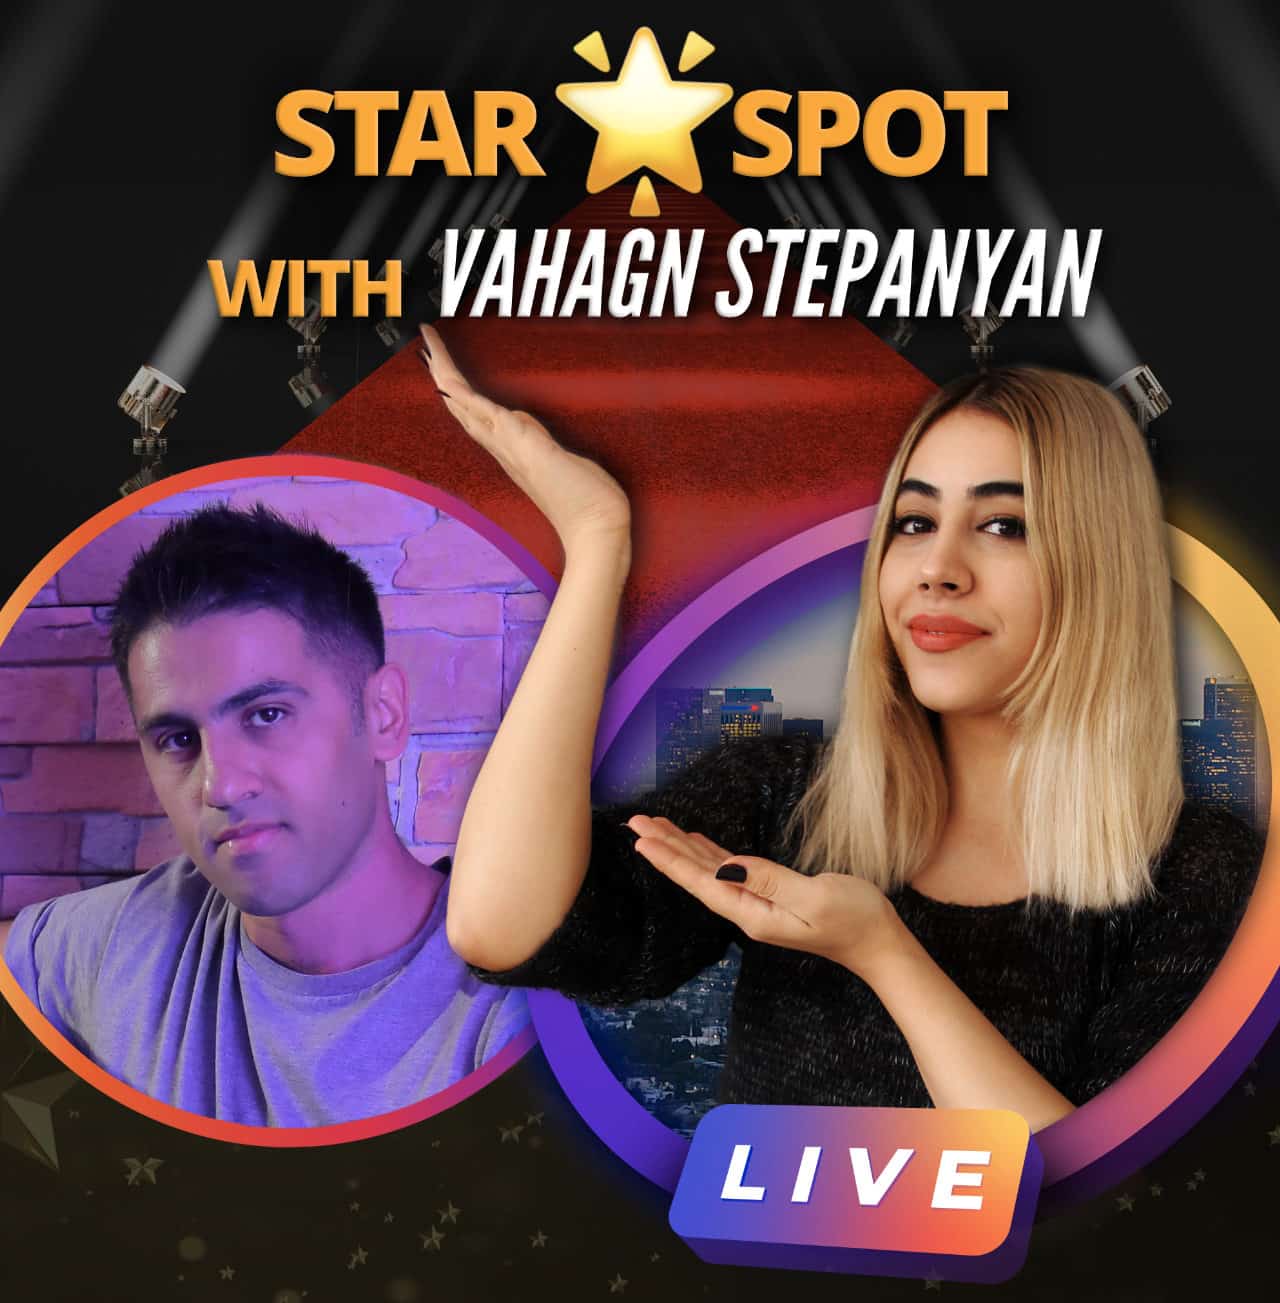 Promotional cover art of Star Spot with Vahagn Stepanyan